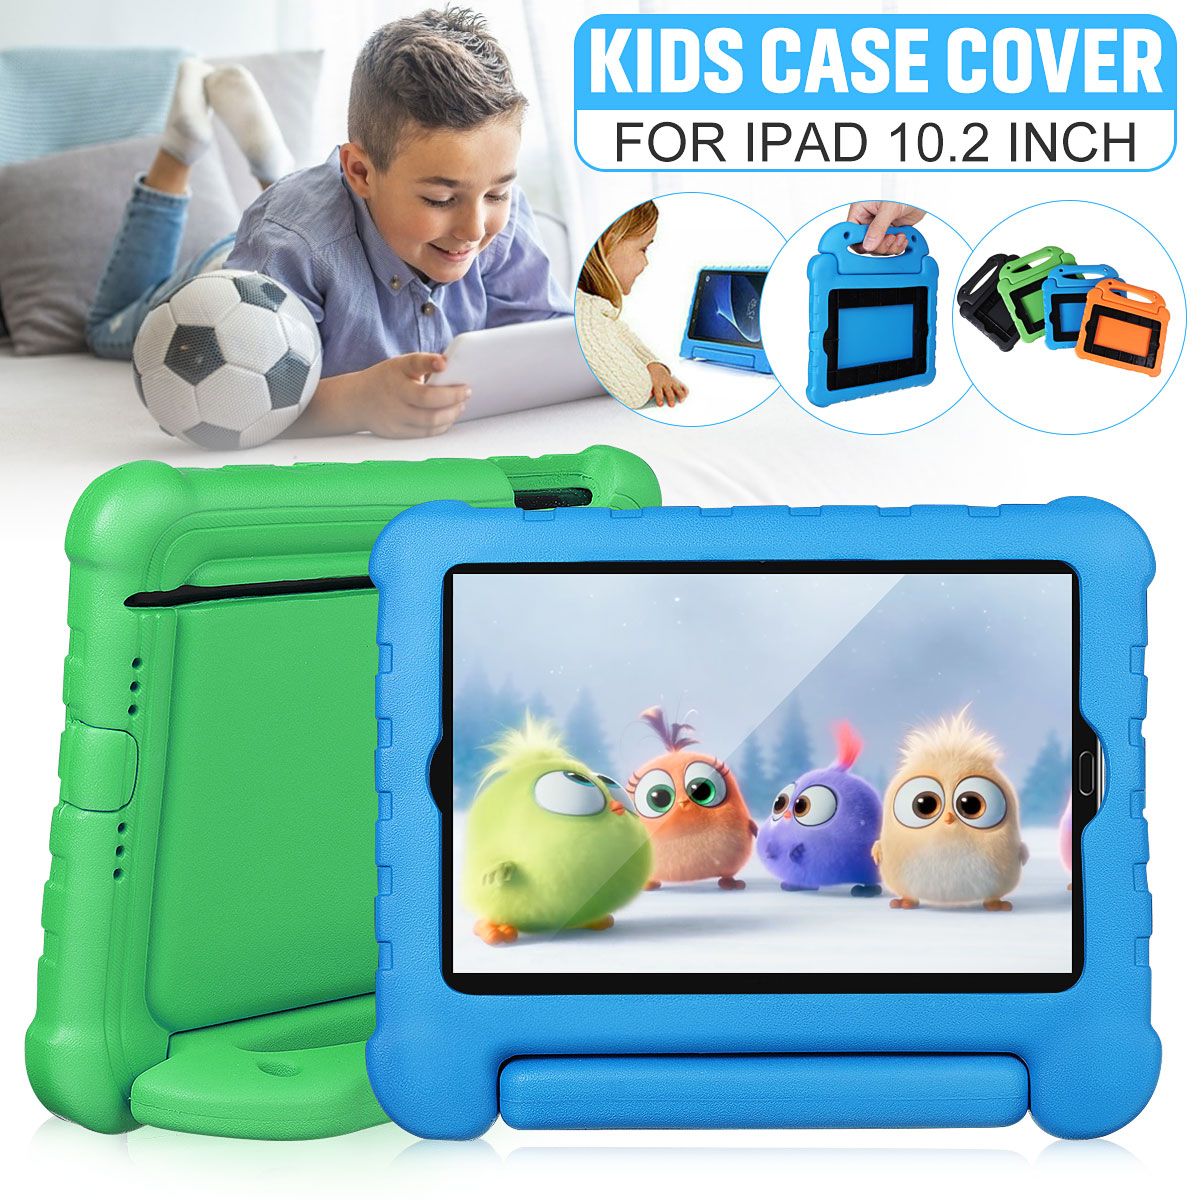 Portable-Kids-Friendly-Safe-EVA-with-Handle-Bracket-Stand-Tablet-Shockproof-Protective-Case-for-iPad-1777875-1